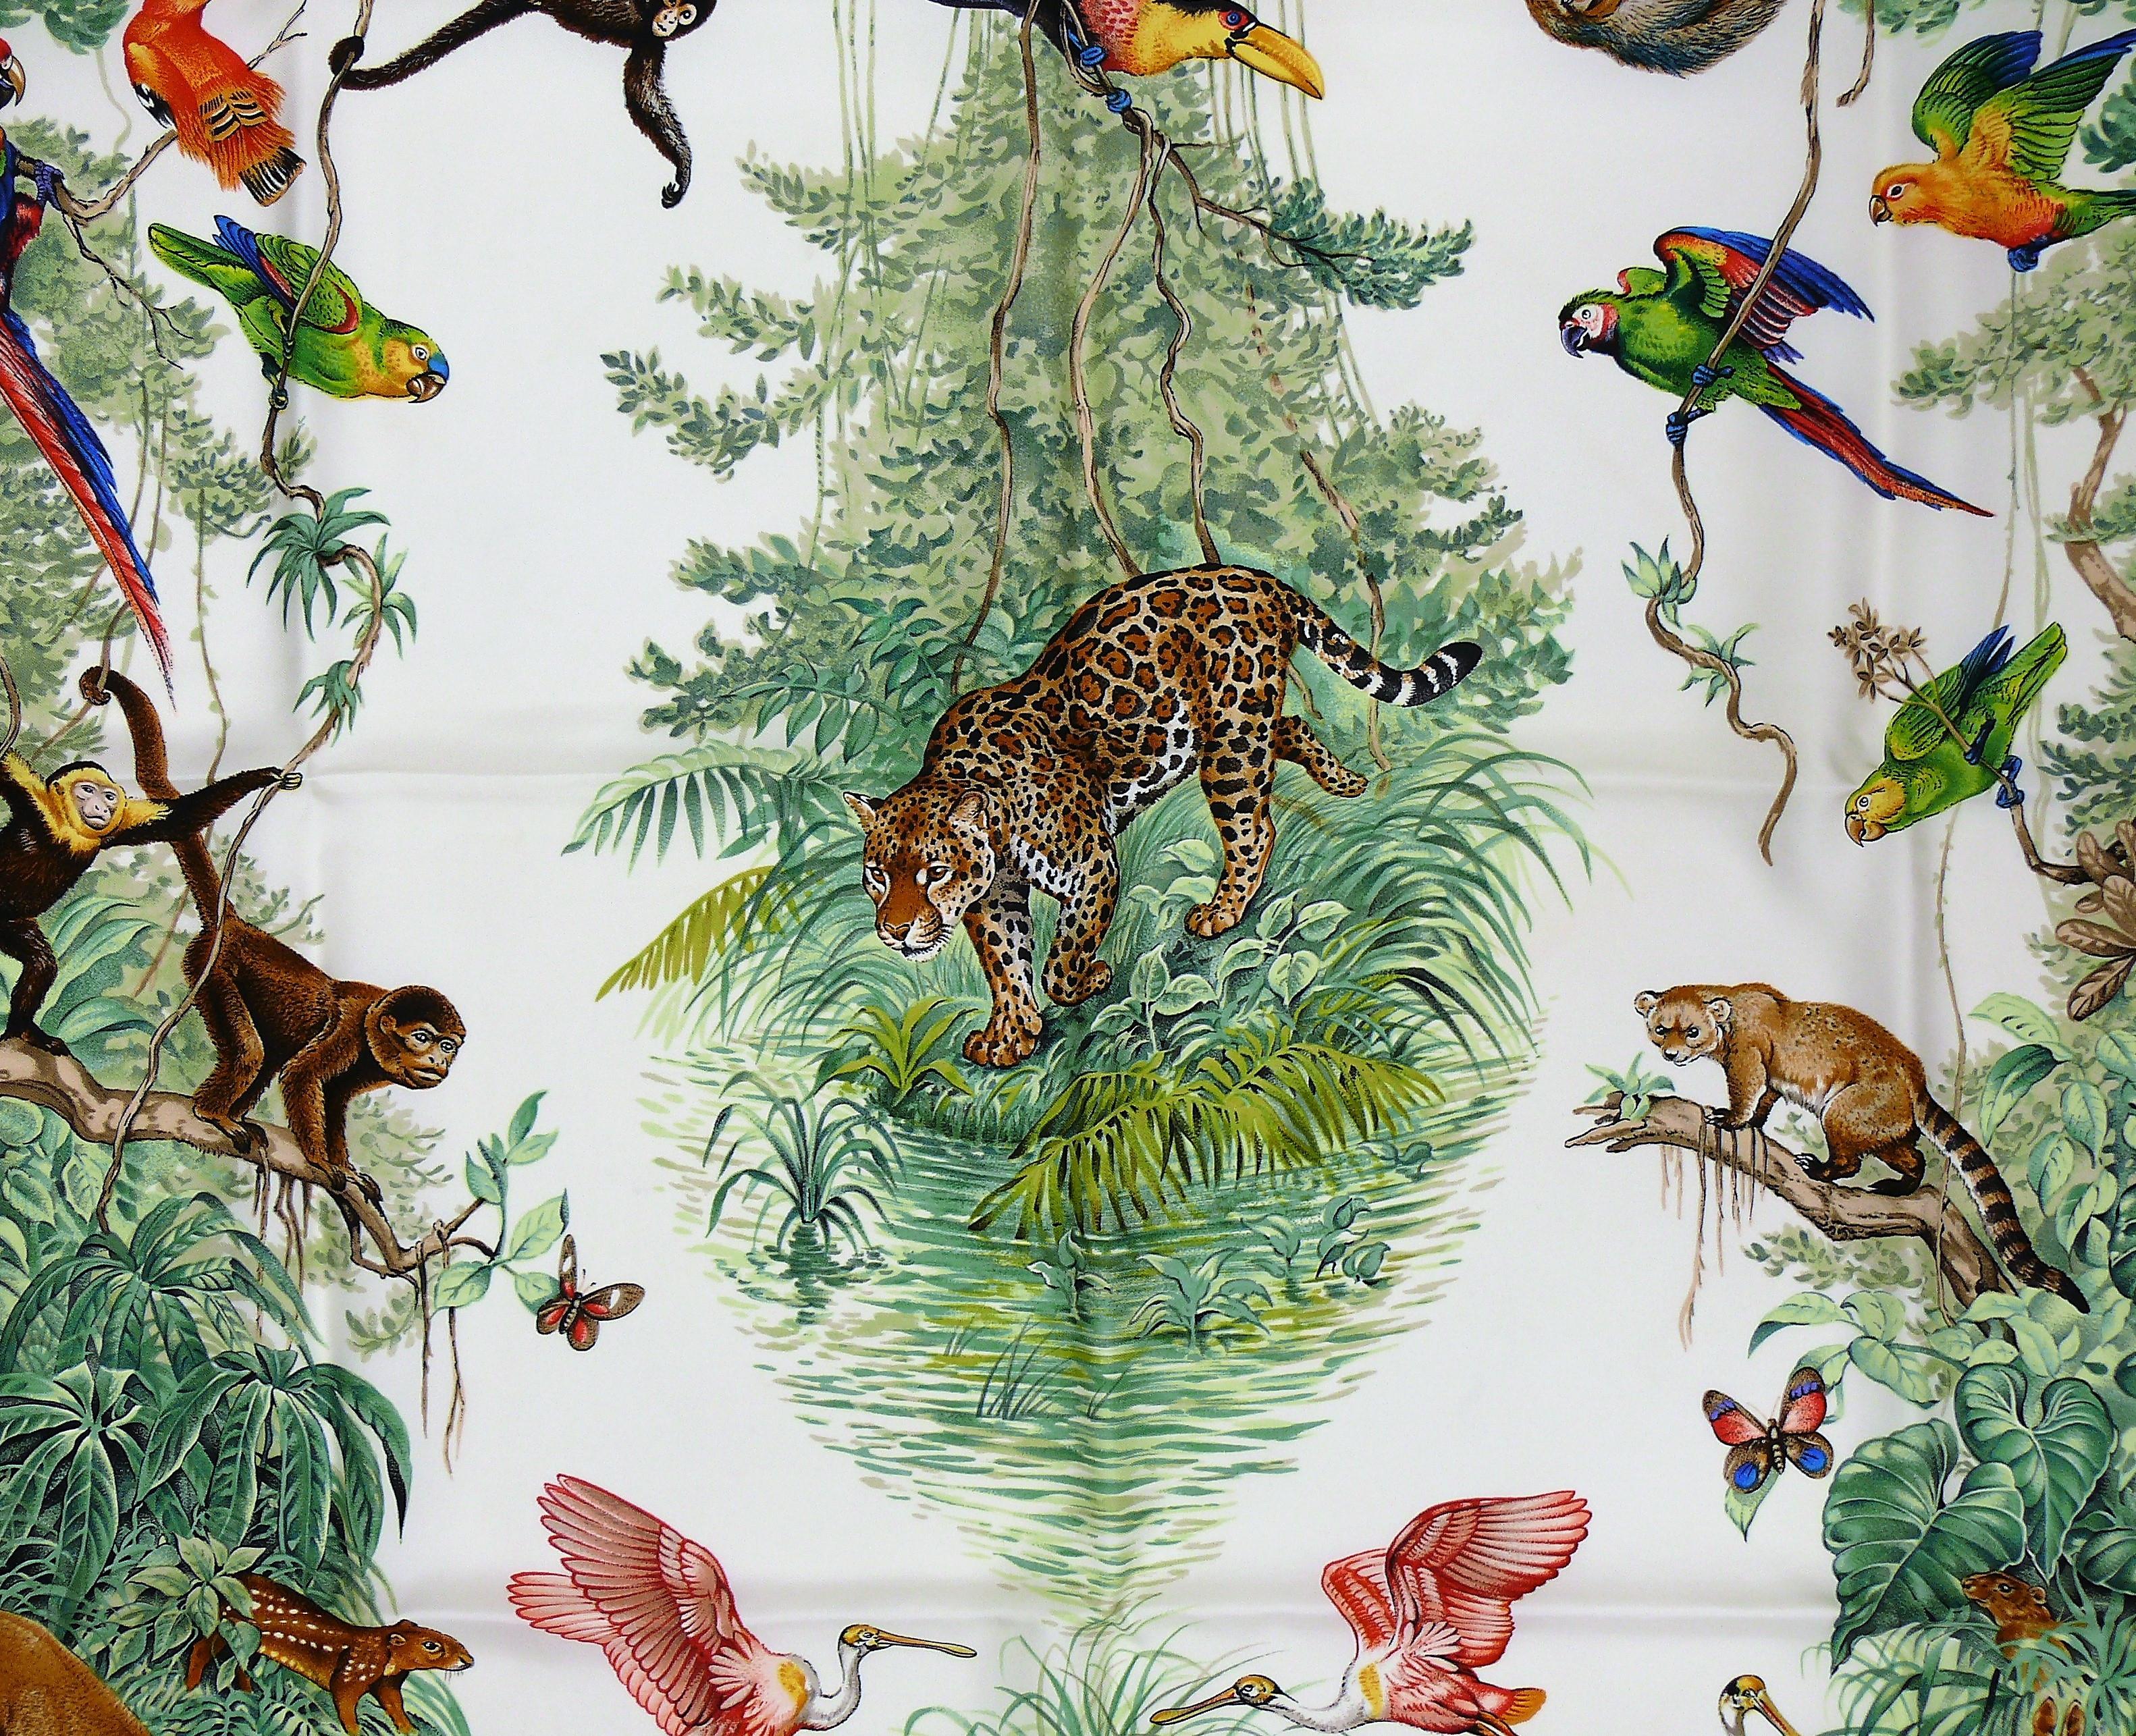 HERMES vintage silk carré scarf EQUATEUR featuring multicolored tropical wildlife on an off-white background.

First issued in 1984 and reissued in 1988/1989.

Designed by ROBERT DALLET.

This scarf features :
- Hand rolled borders.
- 100 % silk.
-